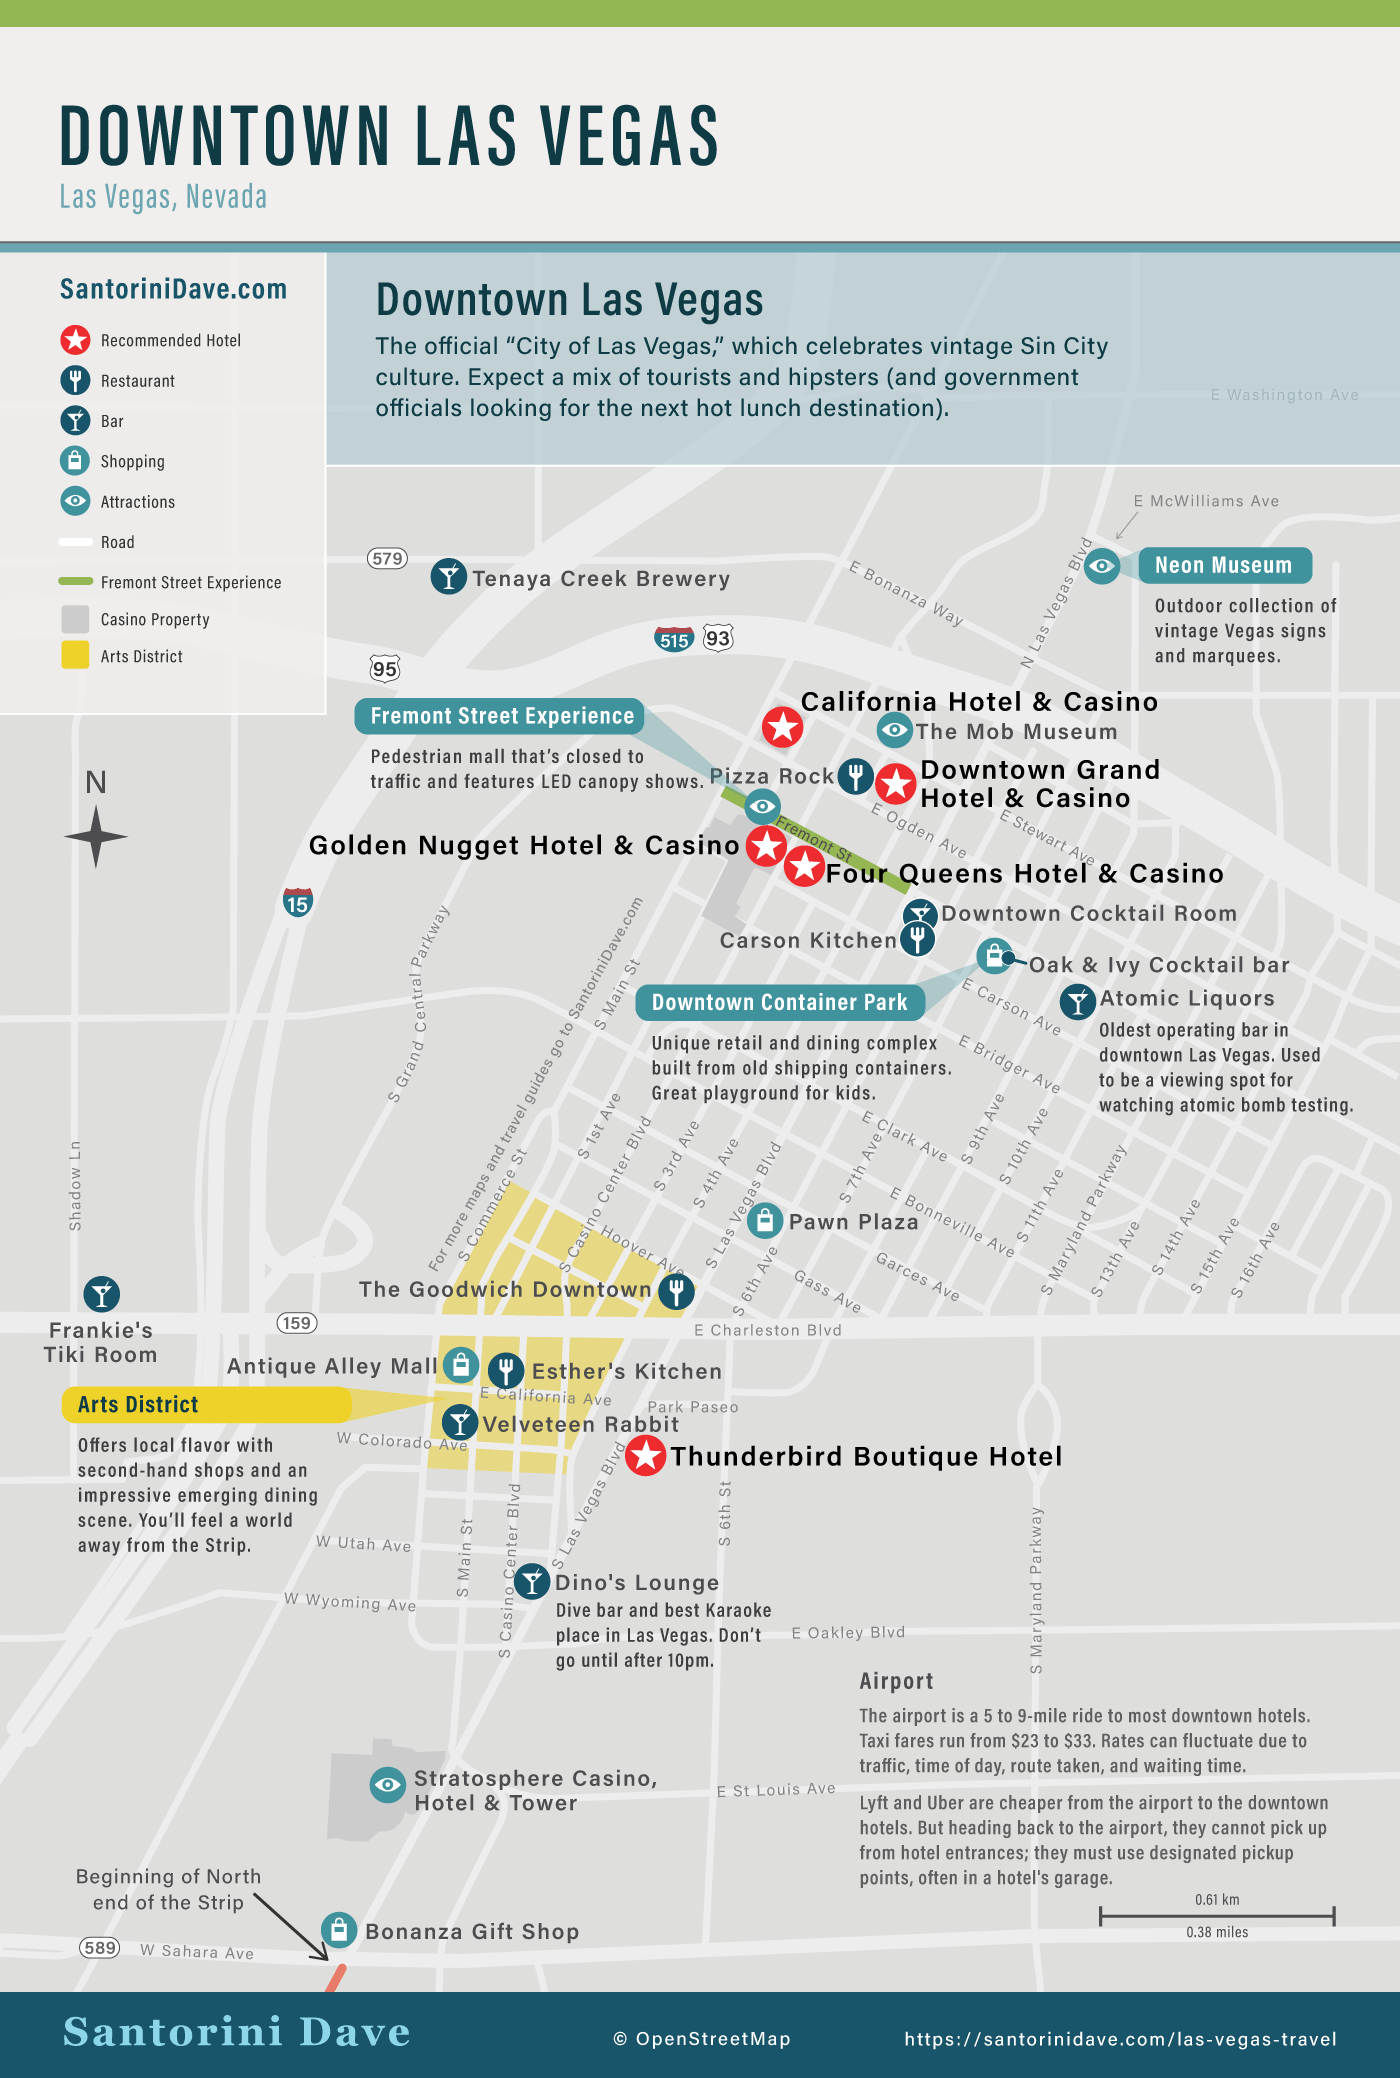 Las Vegas Maps Updated for 2020